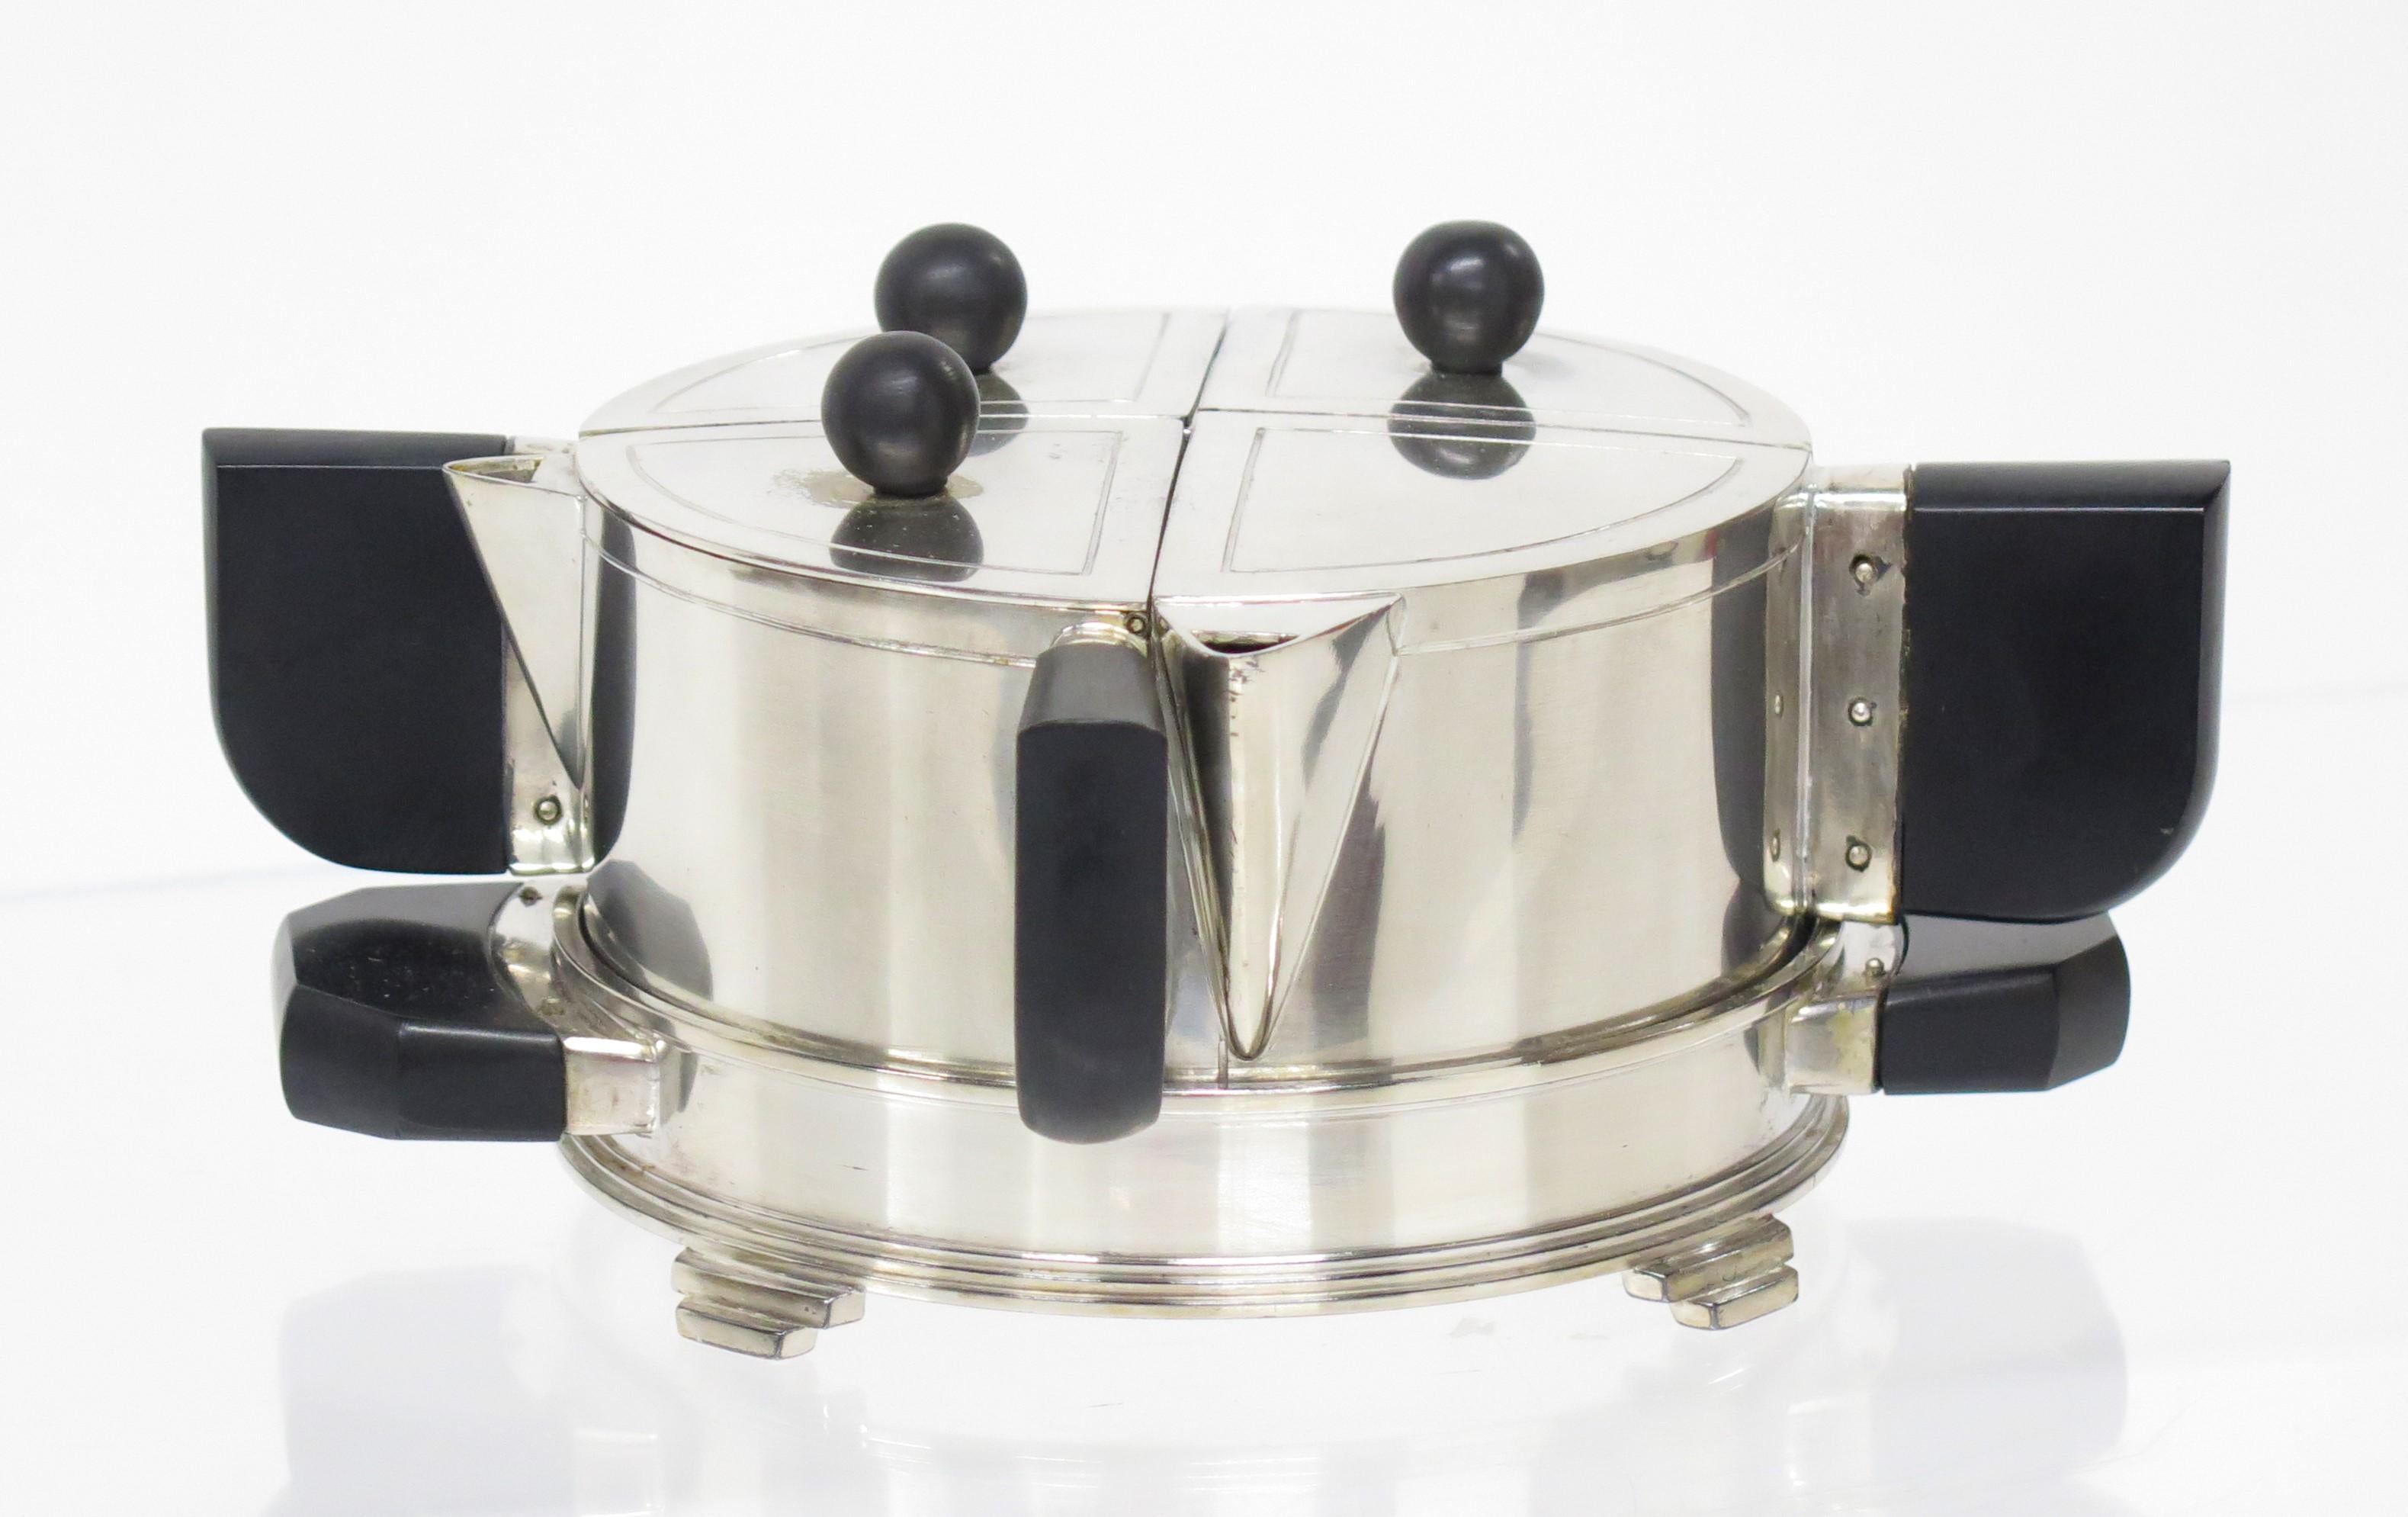 Art Deco Tea Set by Jean Theobald for Wilcox Silver Plate Company, 1928 (Nordamerikanisch) im Angebot